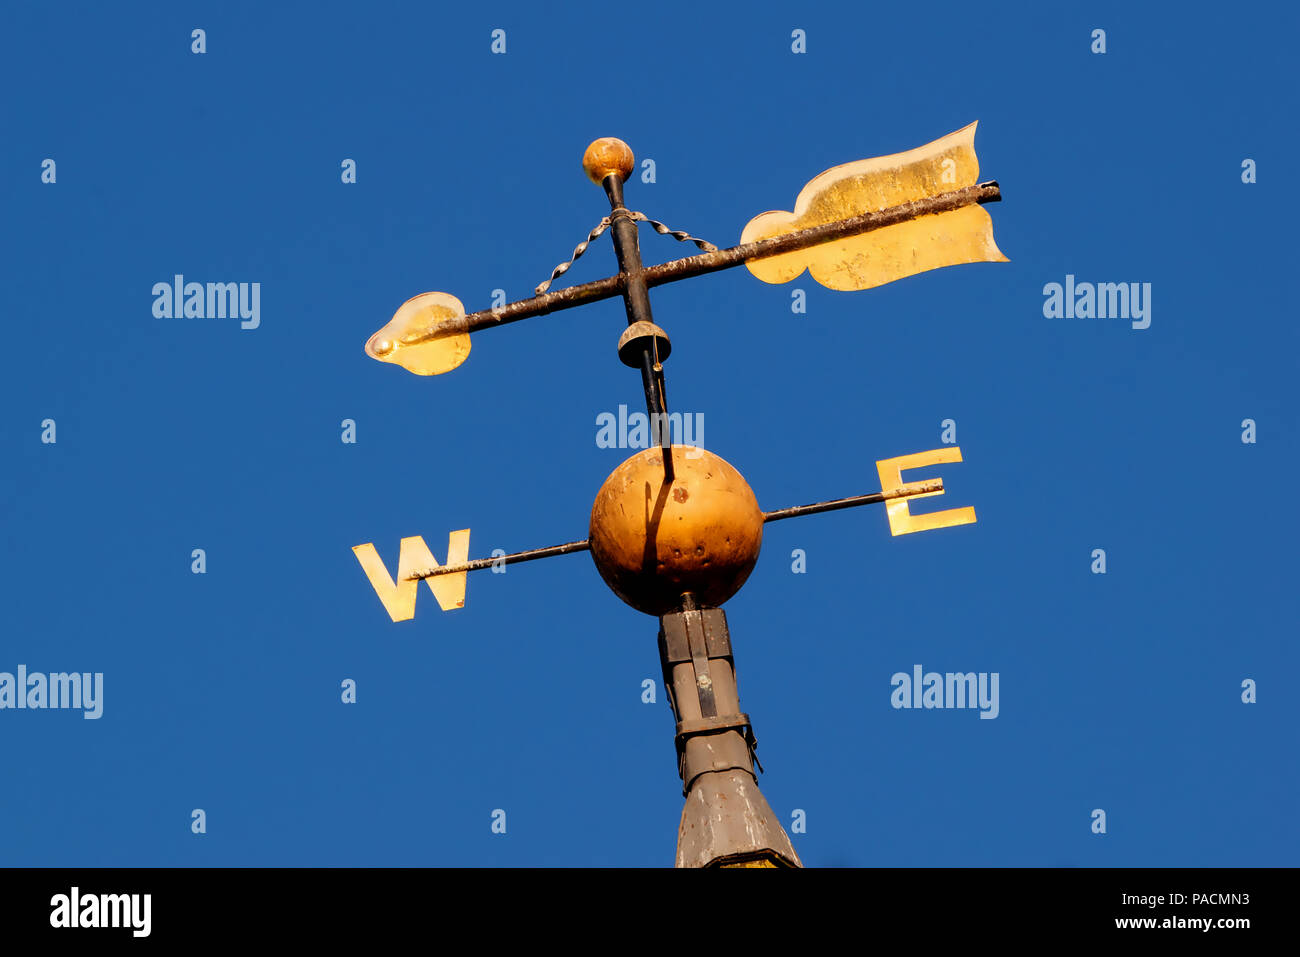 Gold coloured weather vane showing west and east with arrow against bright blue sky Stock Photo